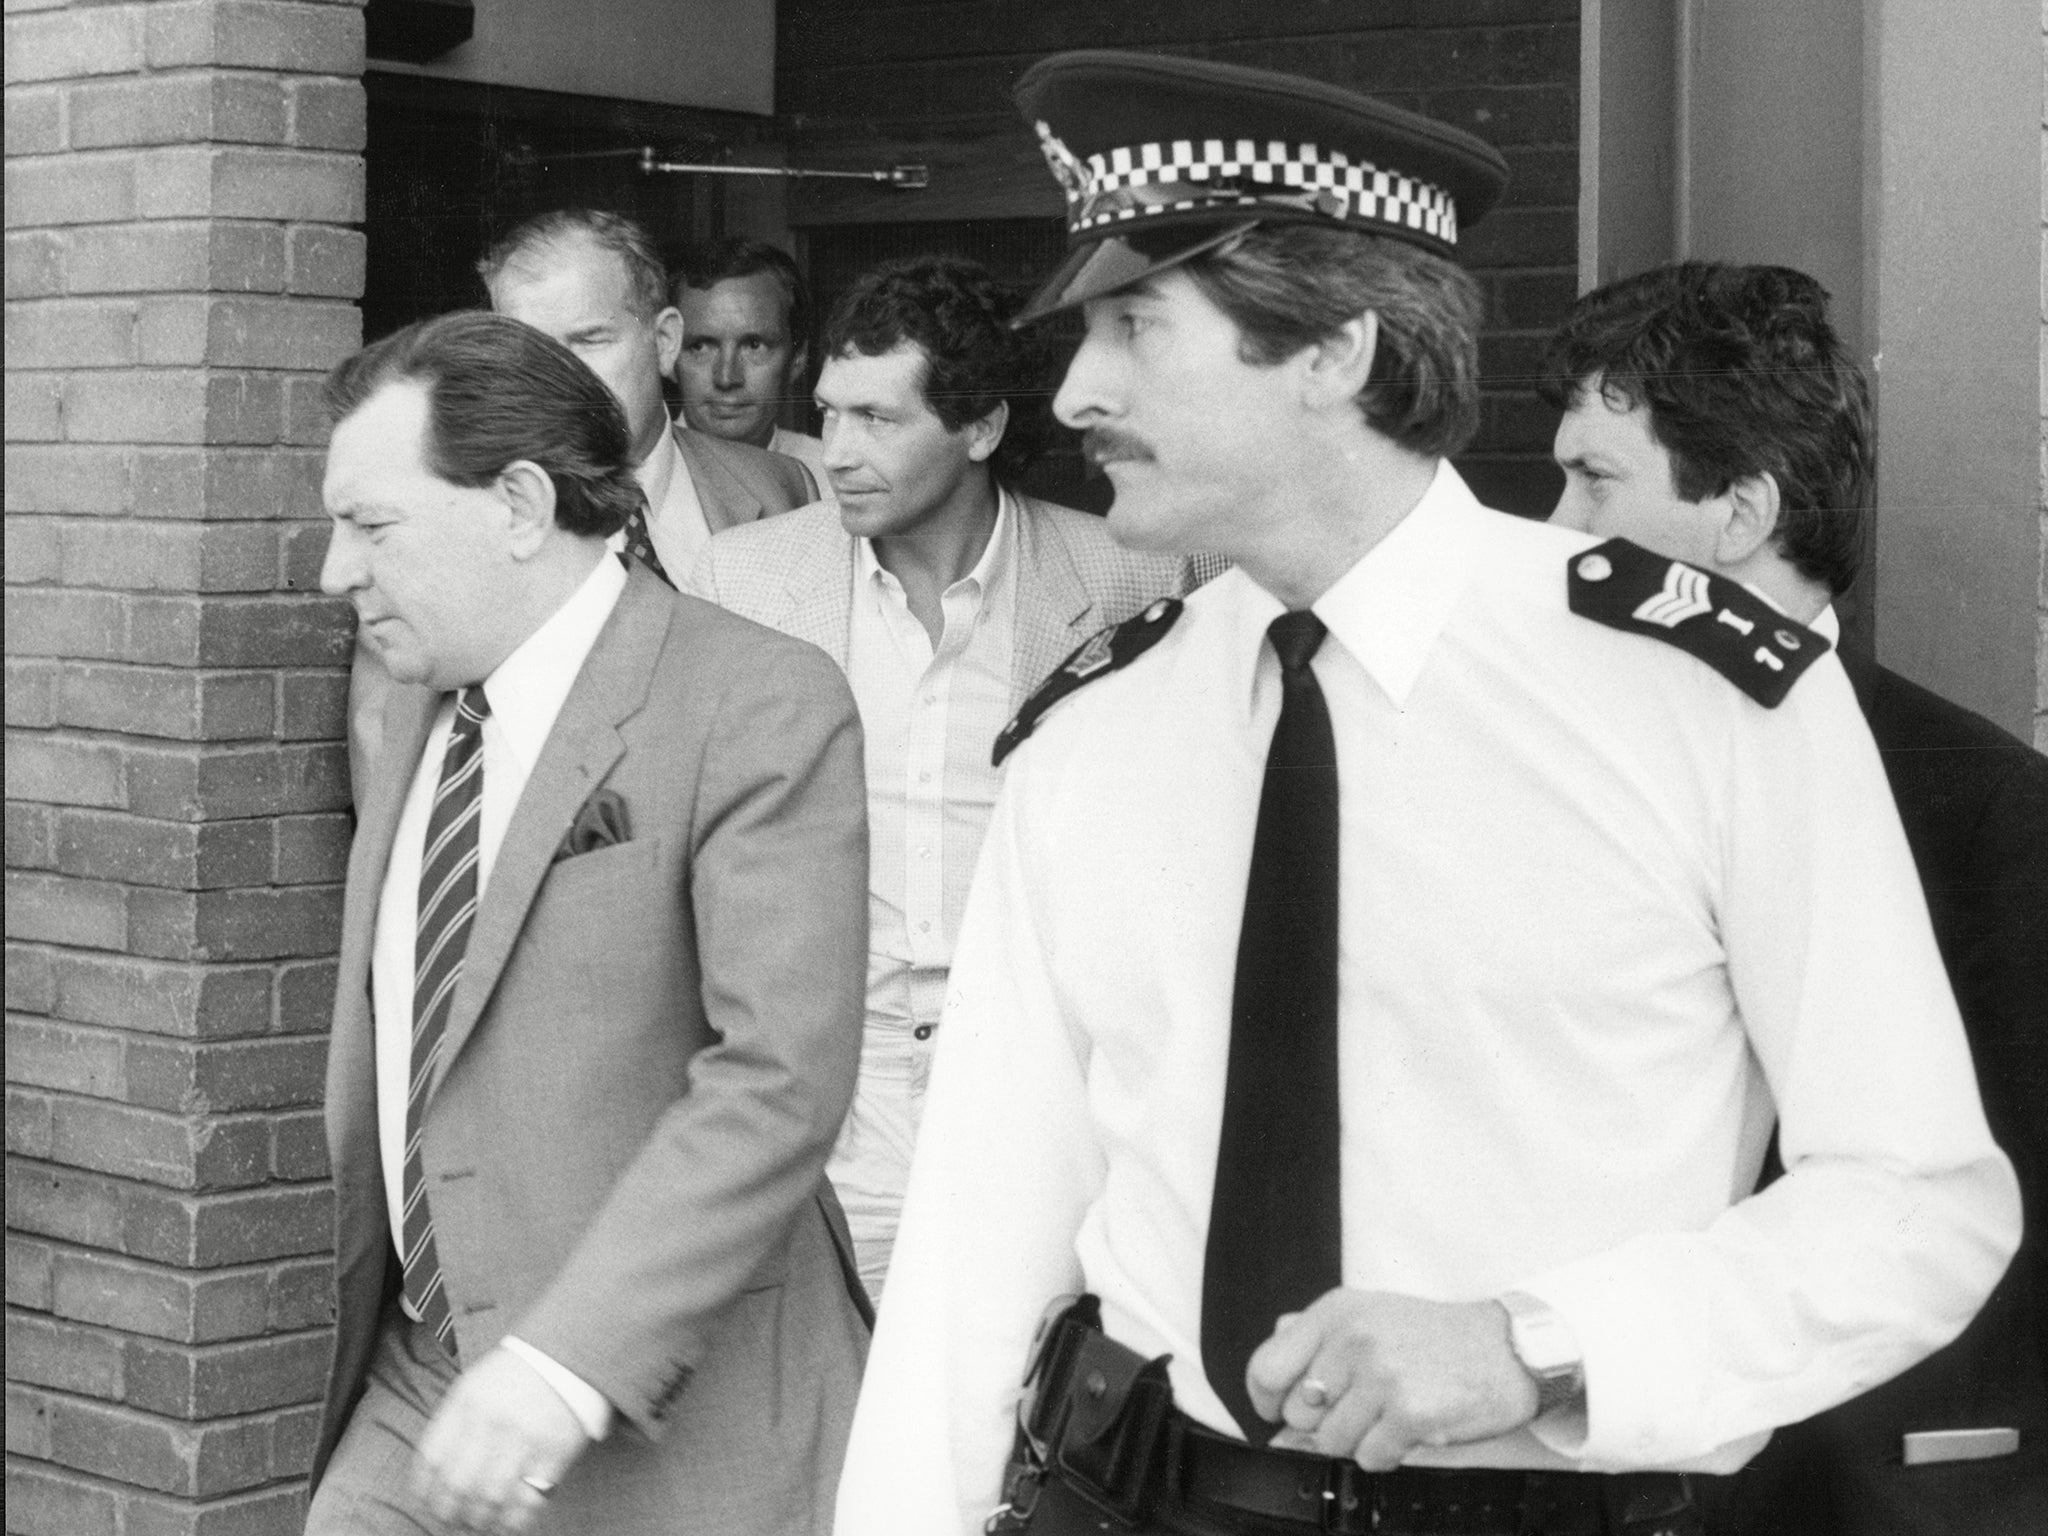 John Palmer surrounded by police as he is arrested in connection with the Brink’s-MAT bullion raid at Heathrow airport, in 1983